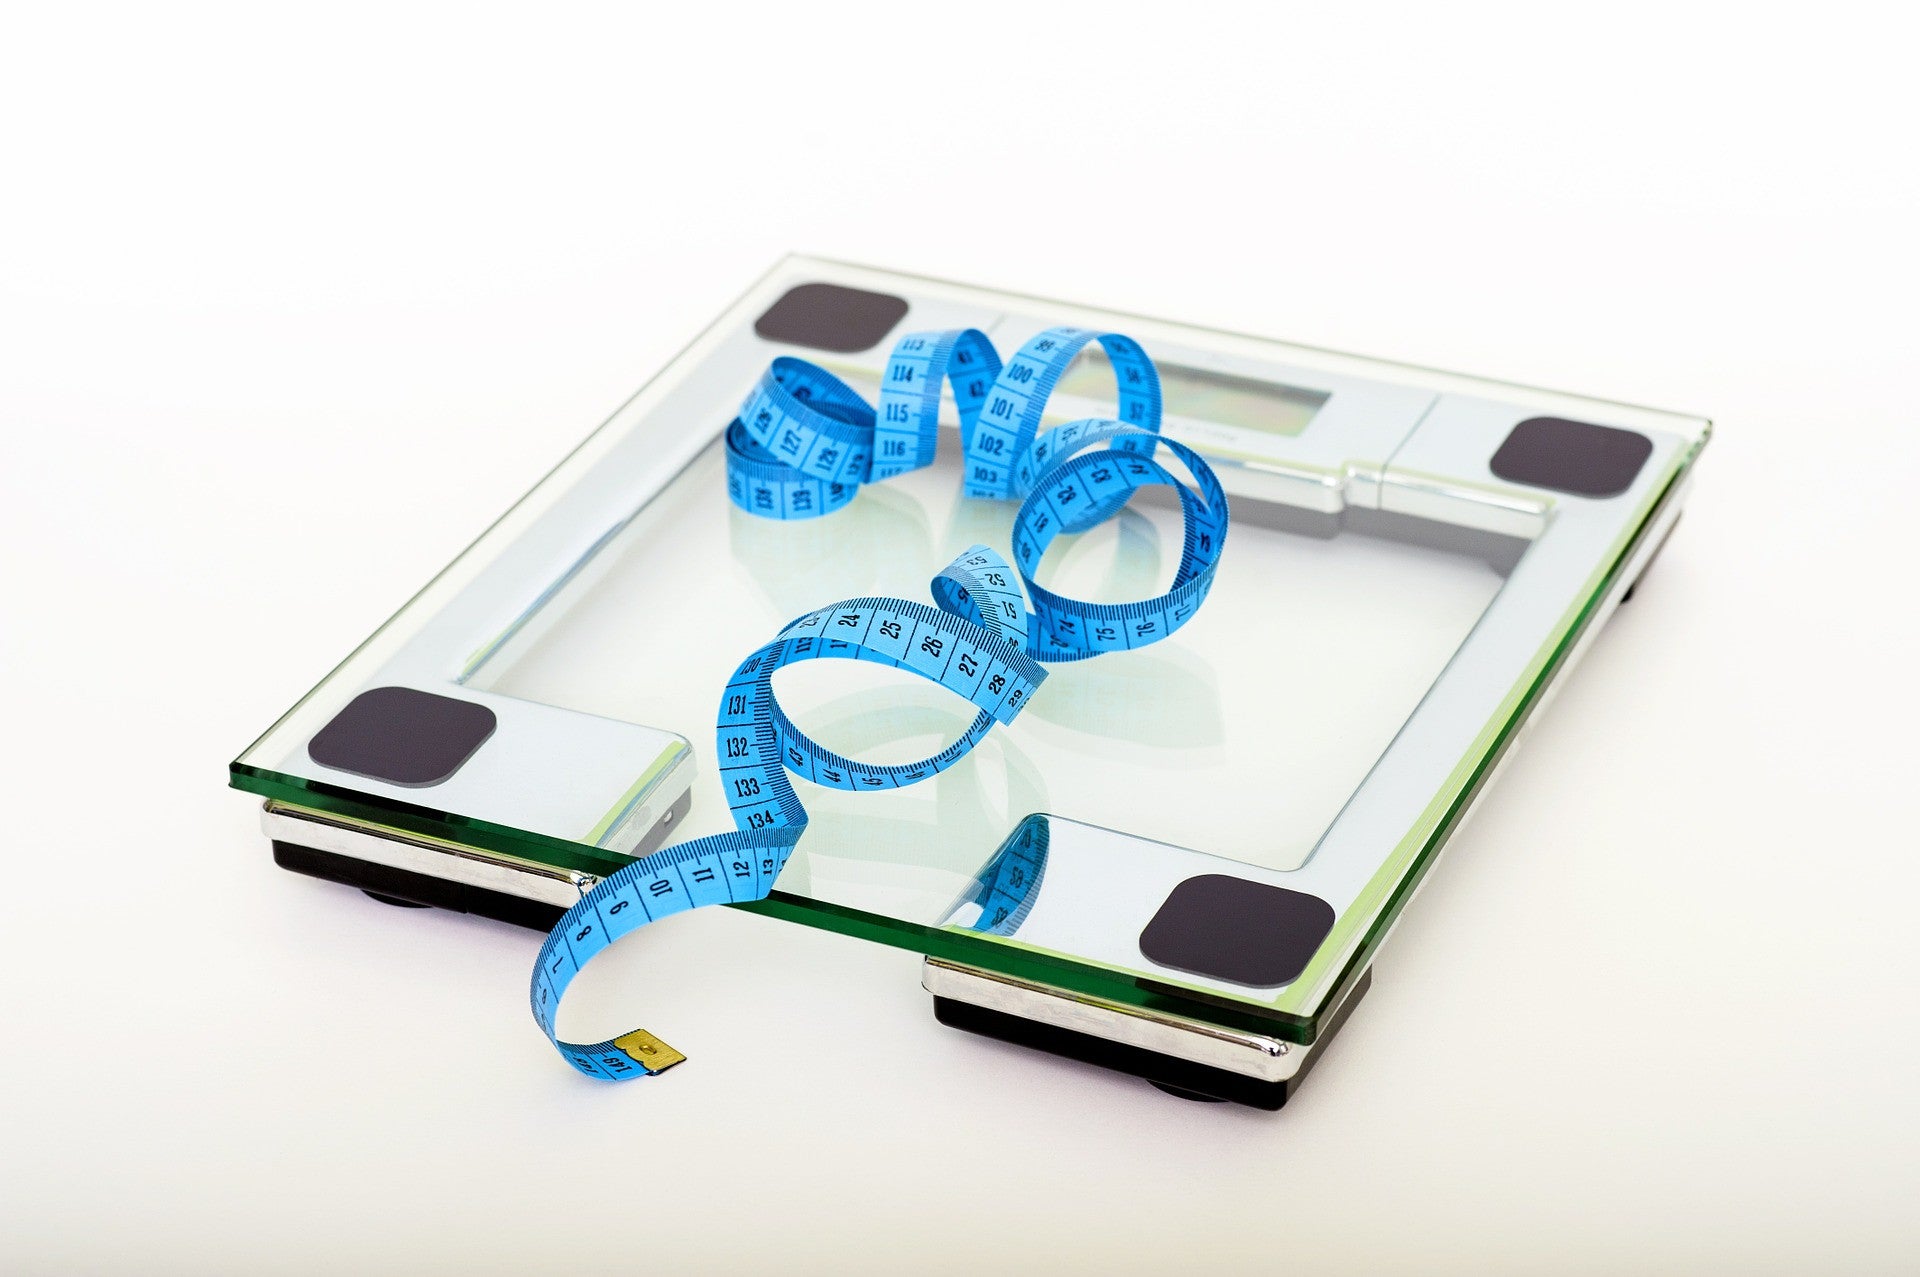 5 Reasons You Need to Ignore What the Scale Says